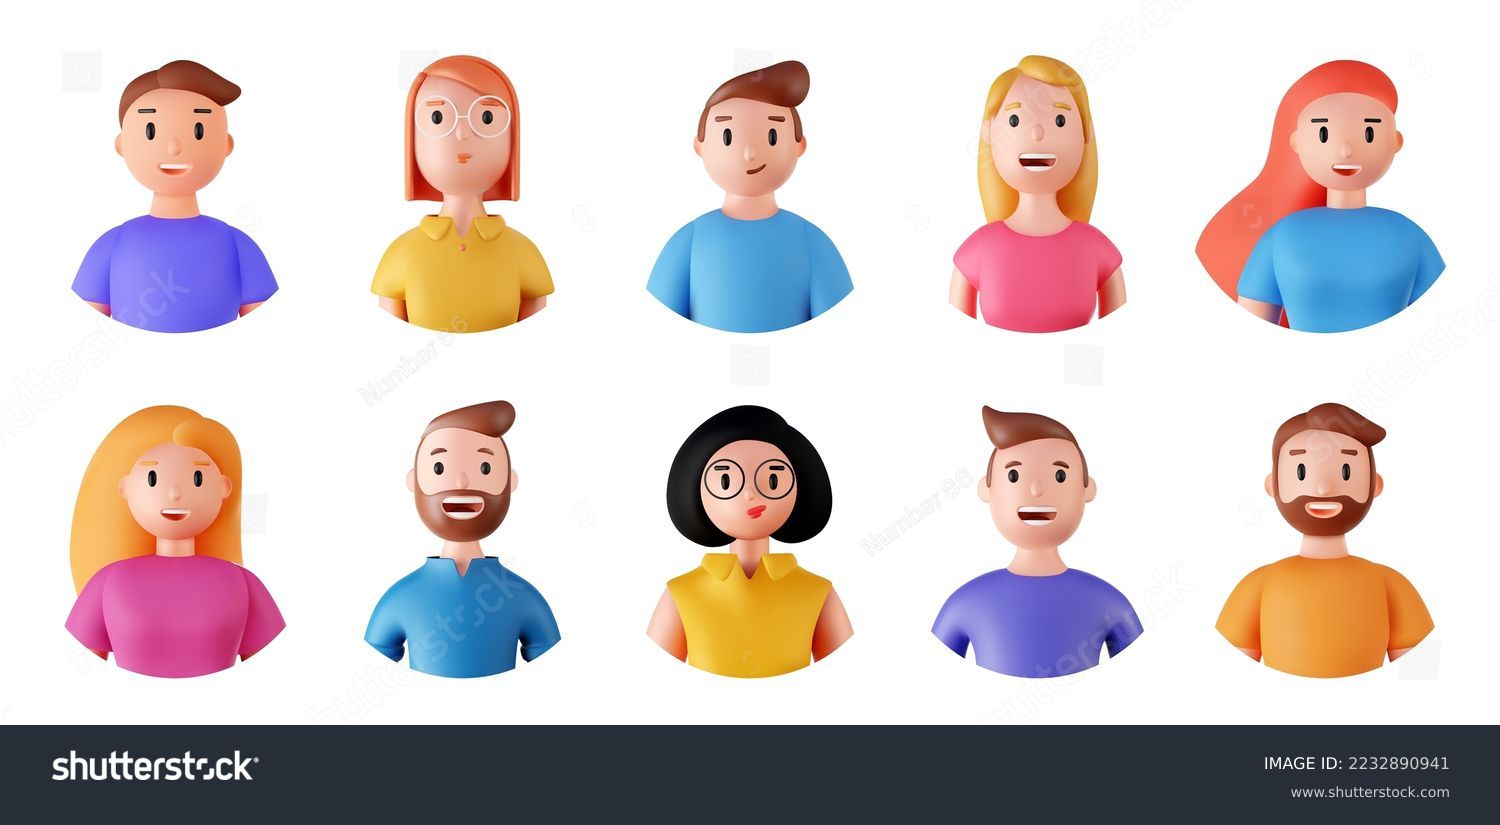 Set of 3d portraits of happy people on a white background. Cartoon characters woman and man, vector illustration. #2232890941